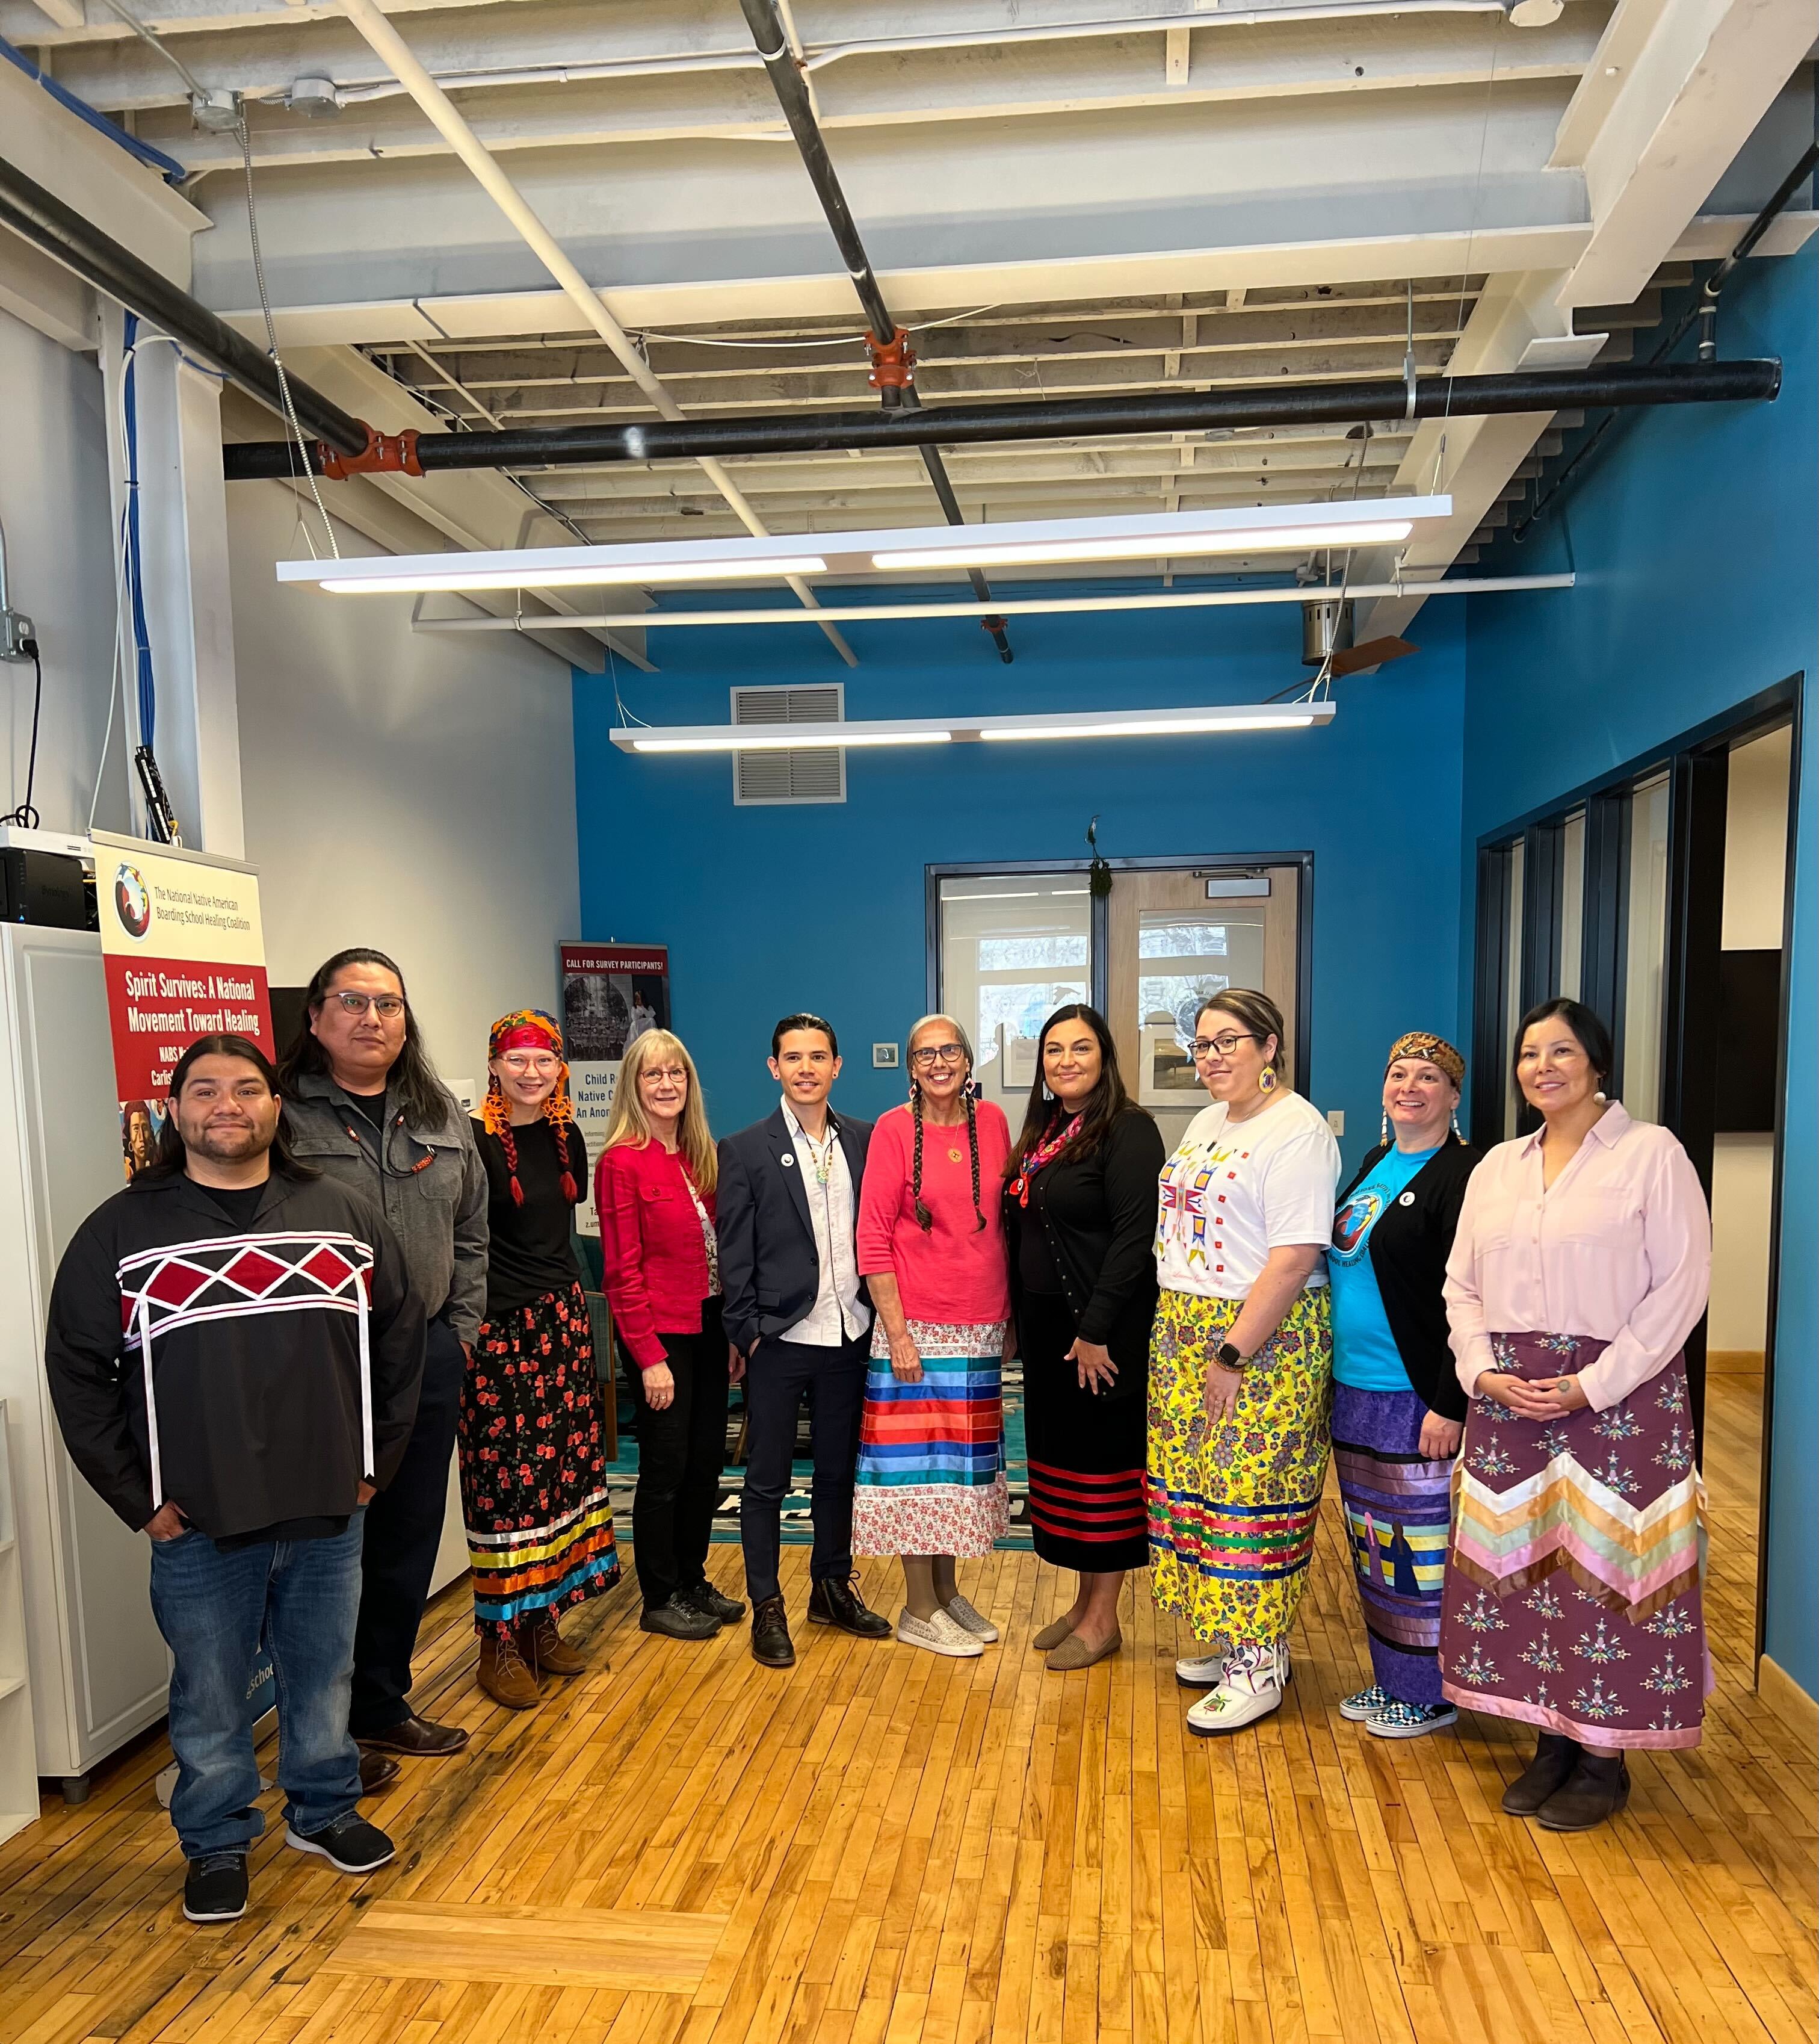 The National Native American Boarding School Healing Coalition holds community gatherings, creating spaces for healing and connection.